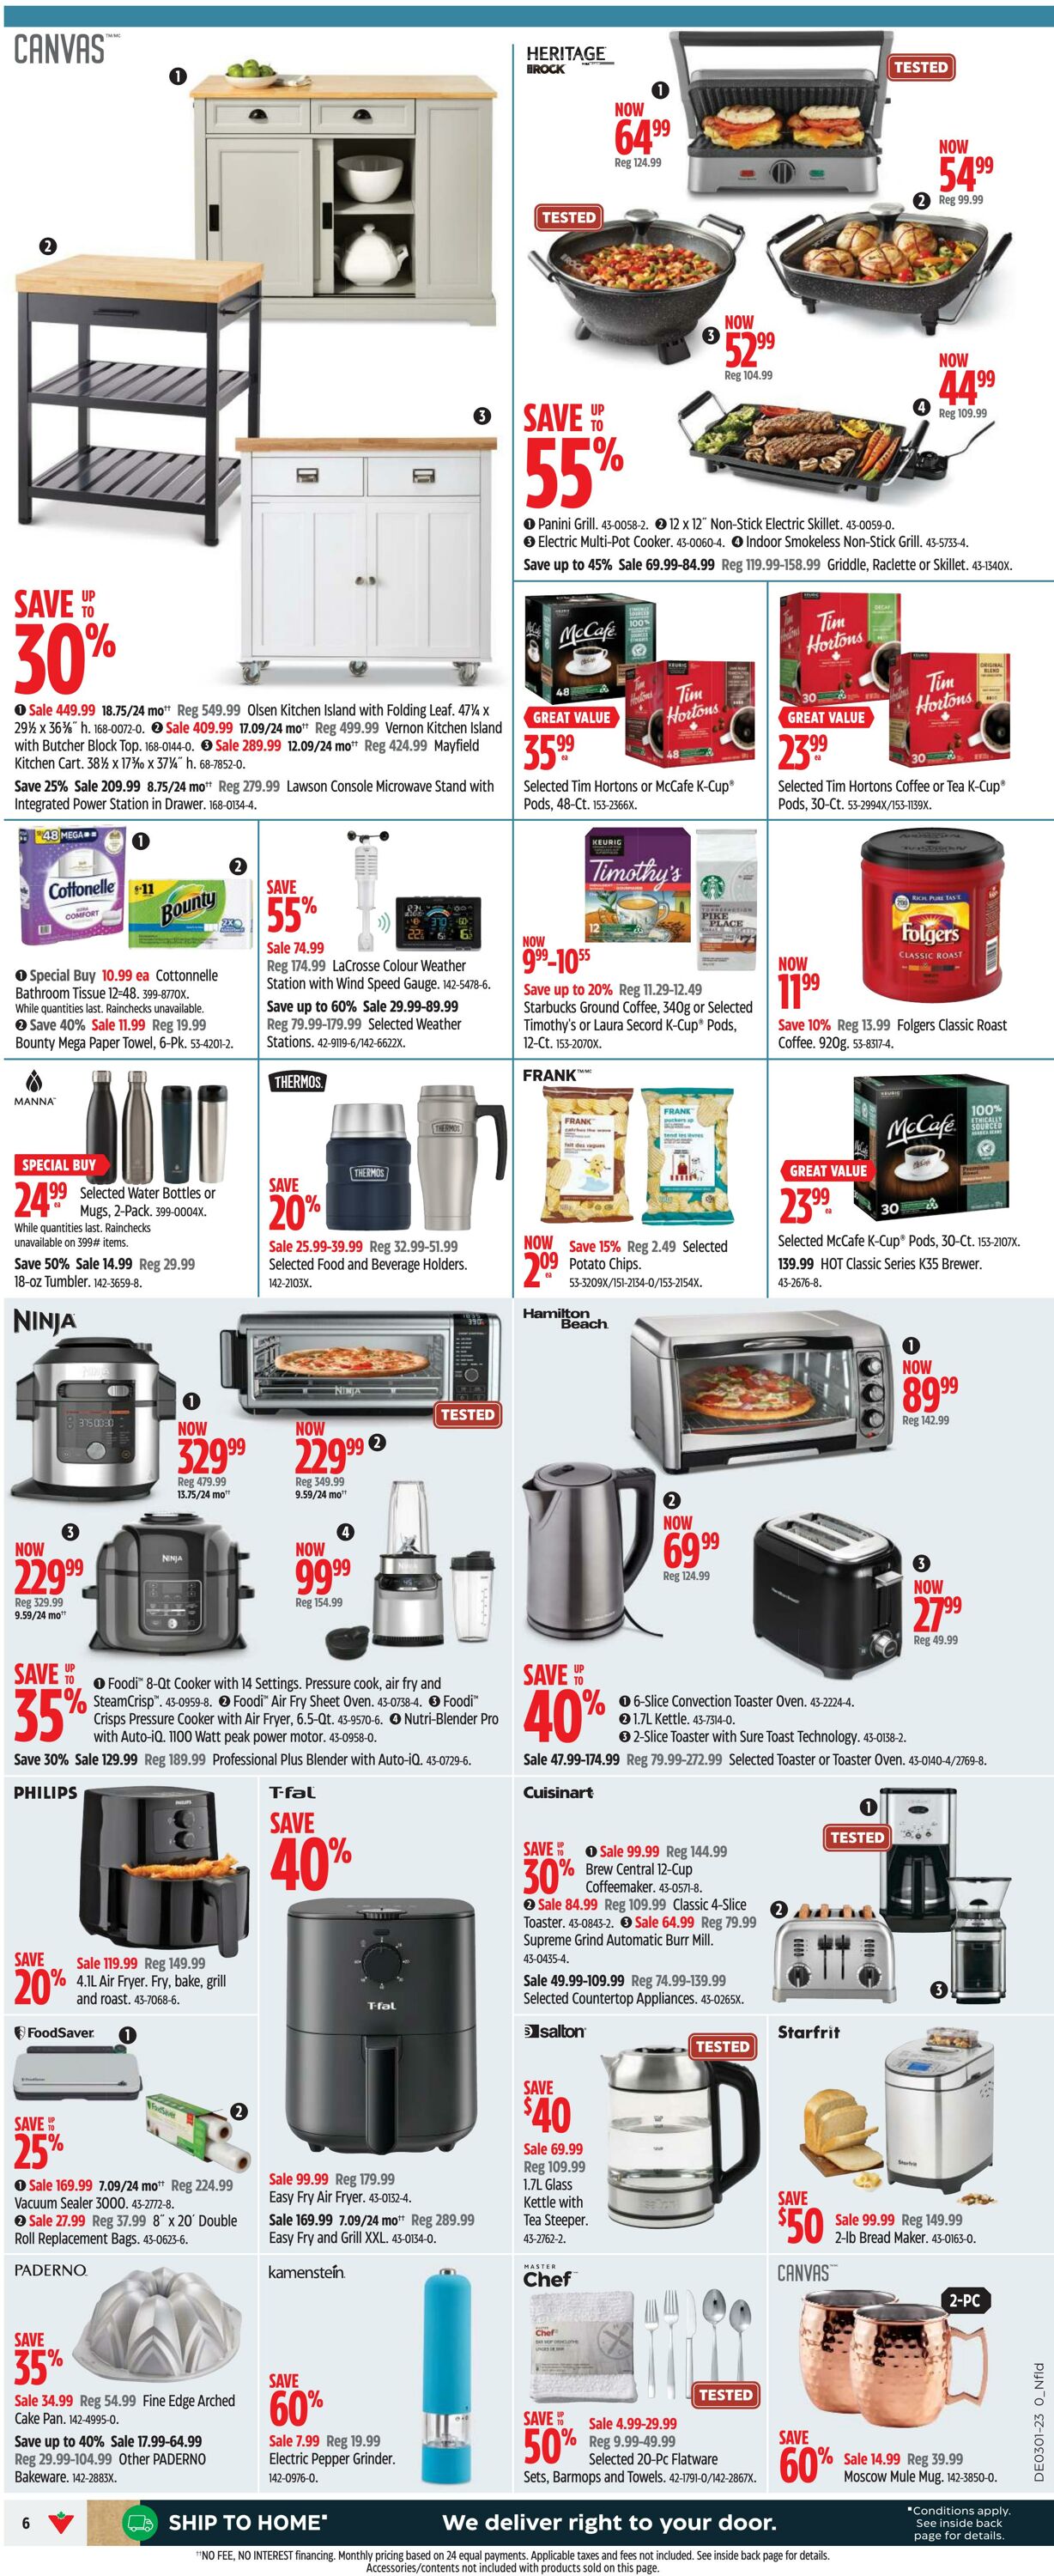 Flyer Canadian Tire 29.12.2022 - 04.01.2023